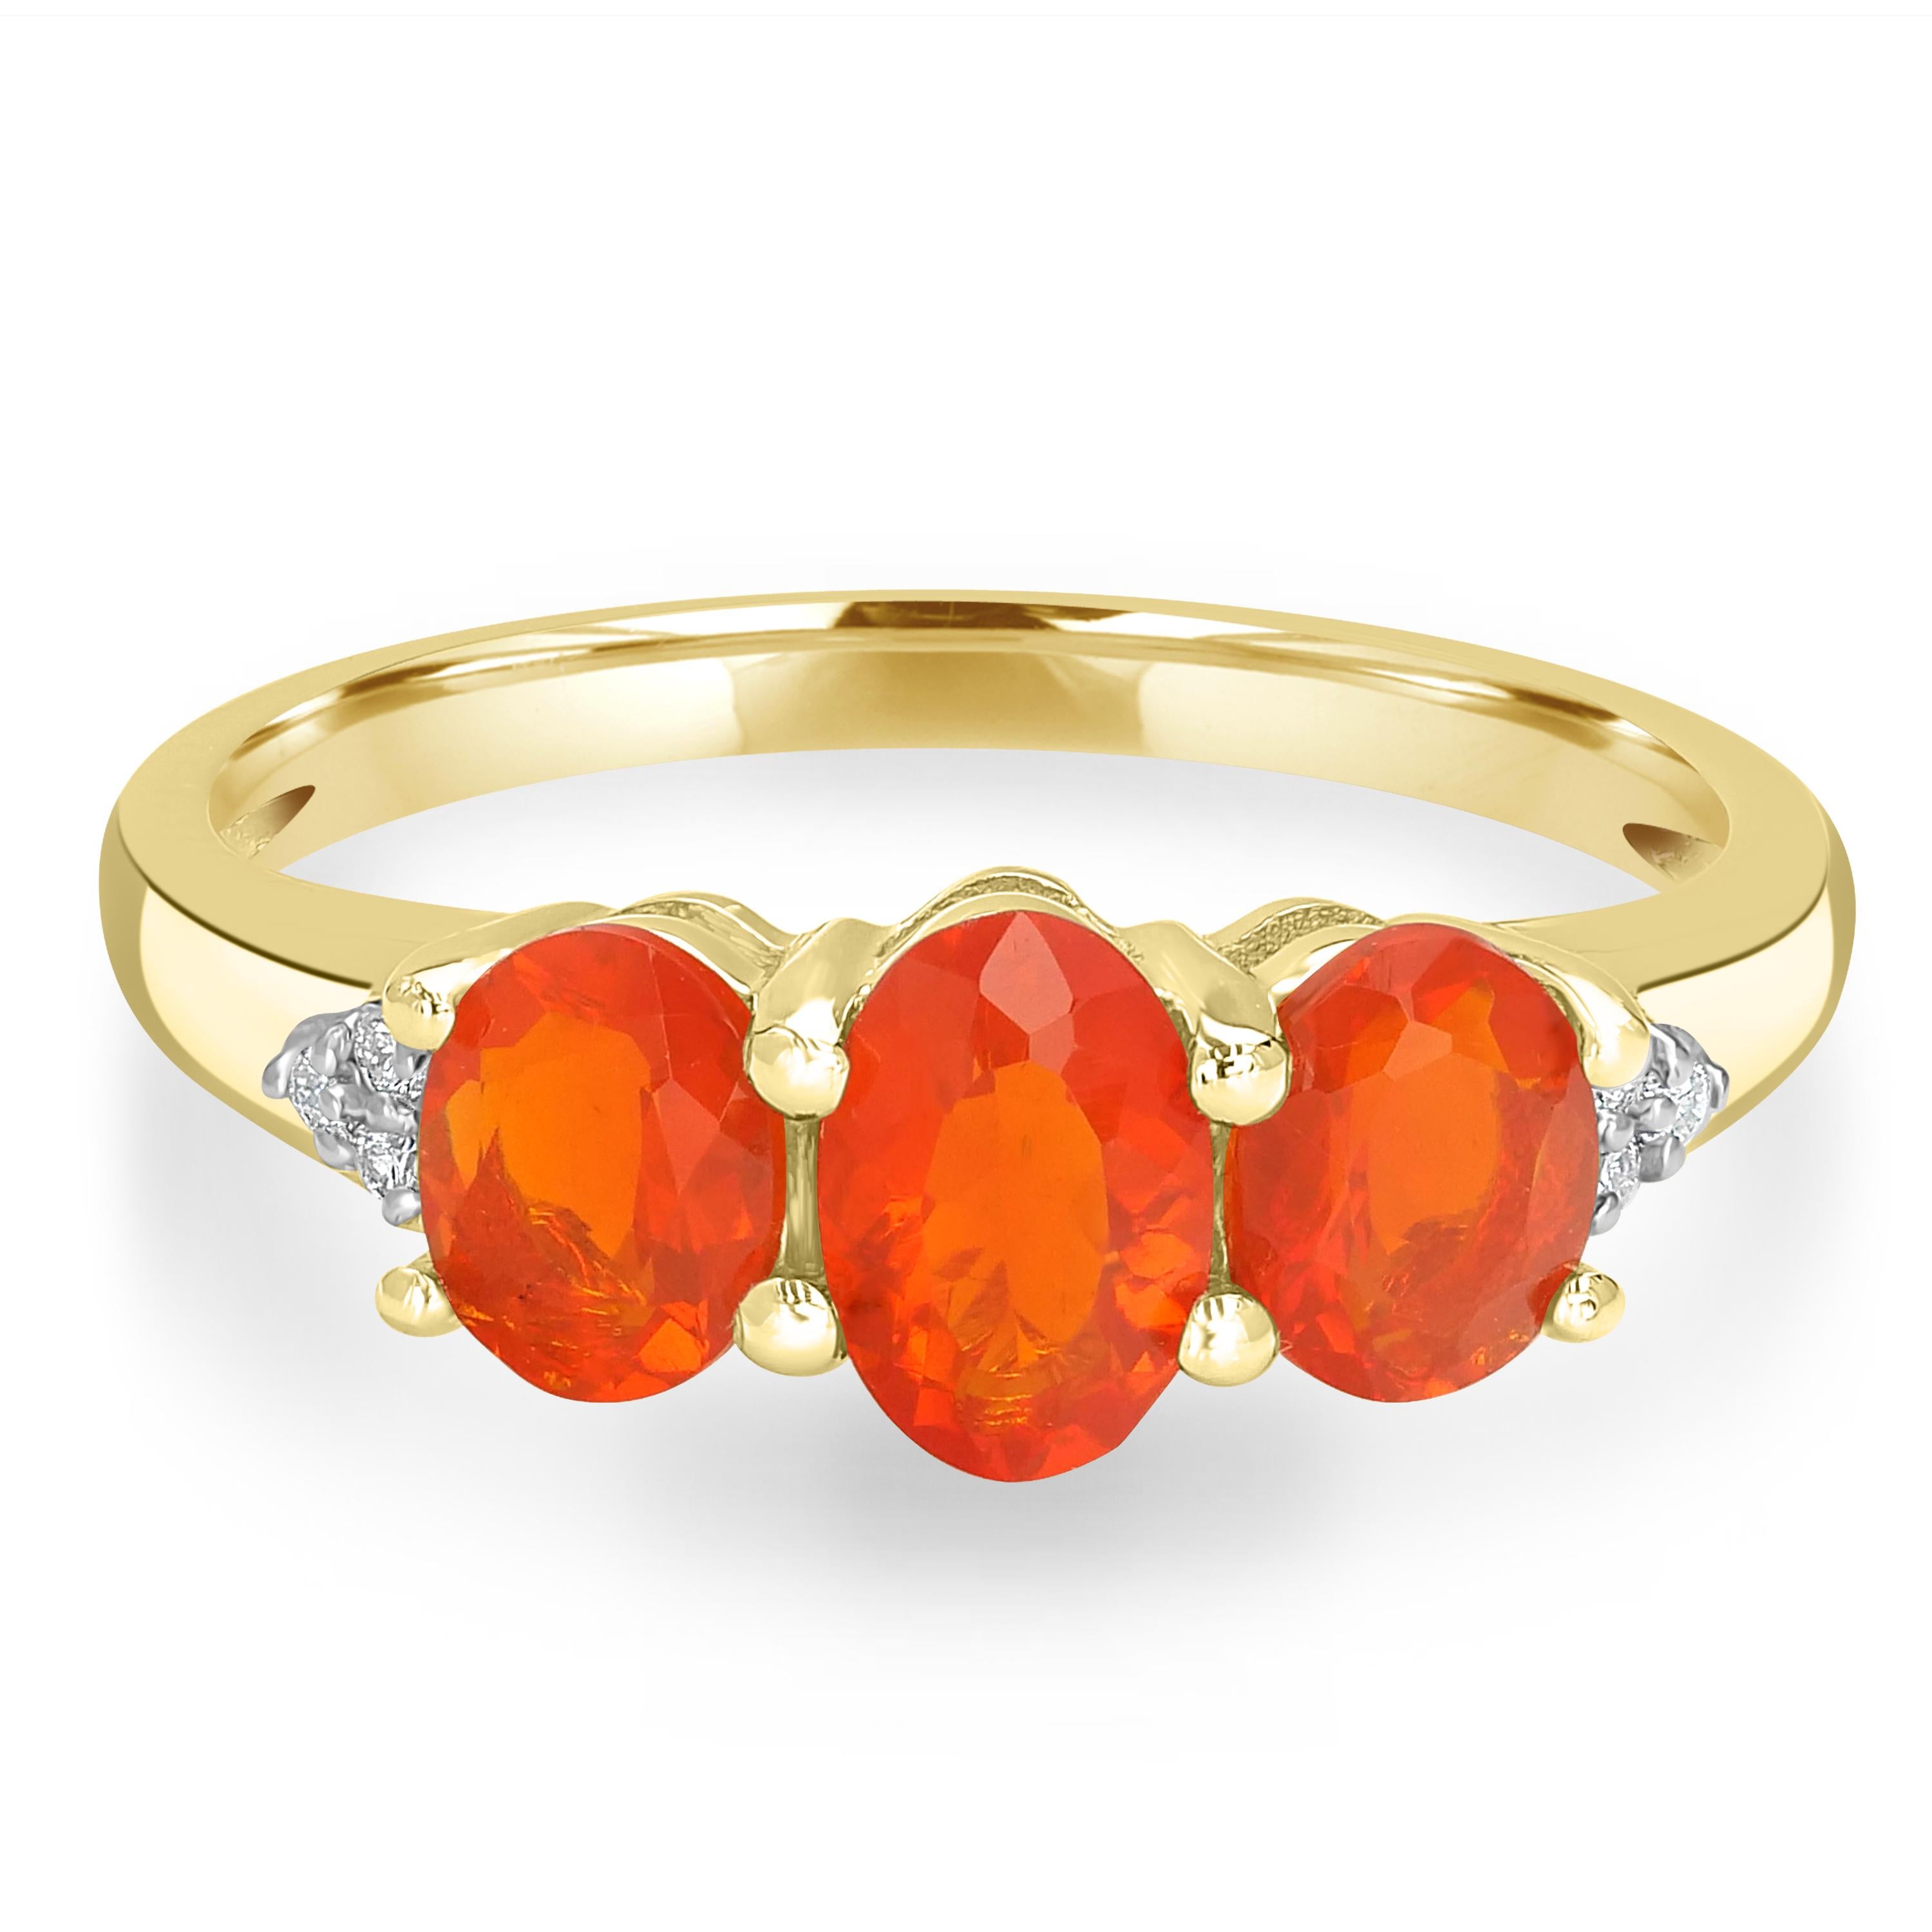 Beaming a bold color, this Gemistry gorgeous oval-shaped fire opal three-stone ring is sure to be a showstopper. Three oval, prong-set .74 carat fire opal at the center with round-cut, prong-set white diamond accents mounted on polished 14k gold